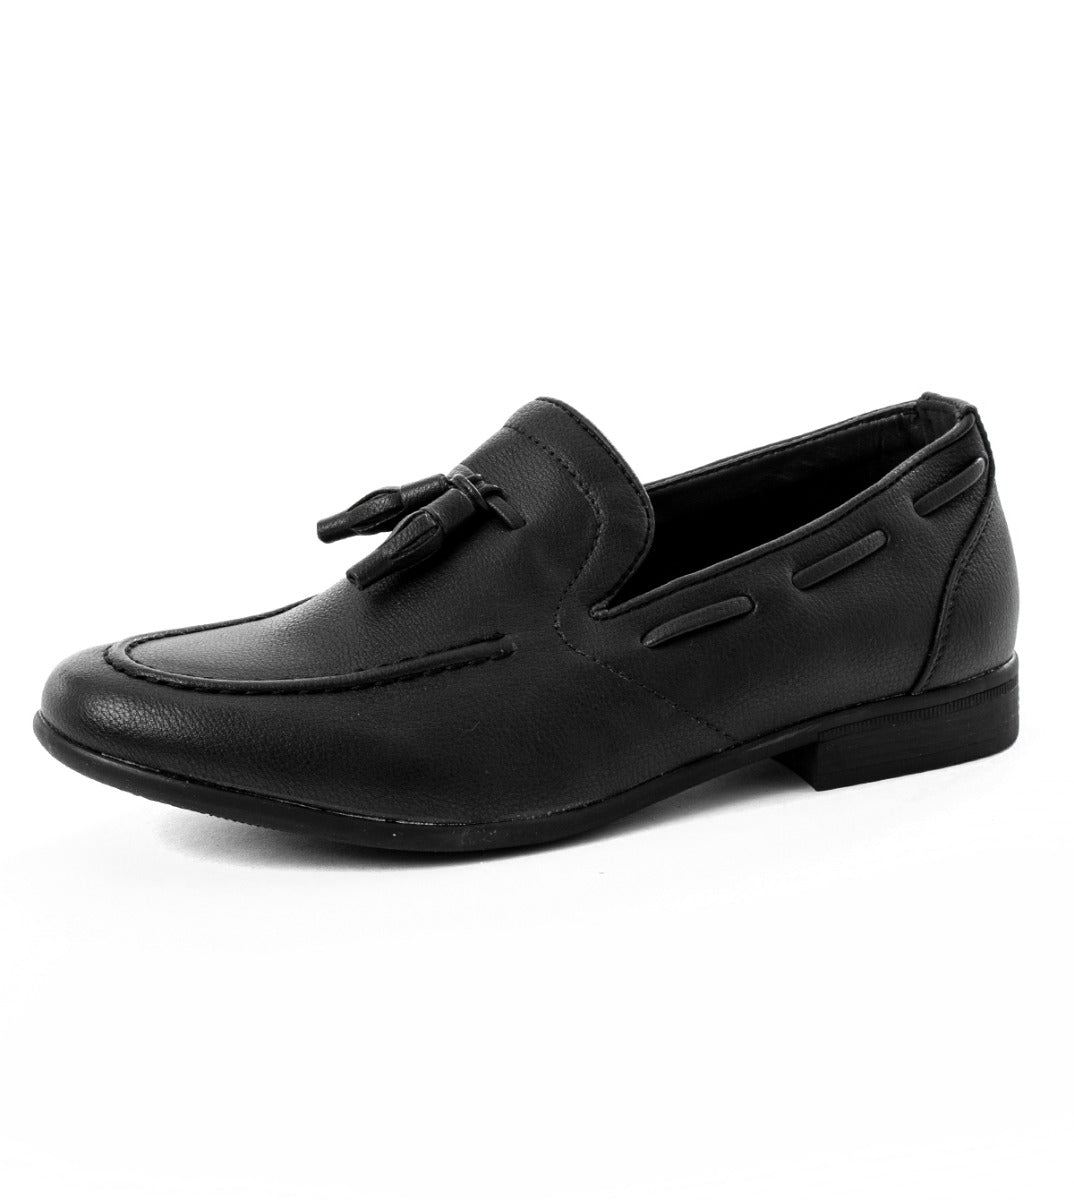 Men's Shoes Moccasins With Tassels Faux Leather Black College Elegant Sports GIOSAL-S1124A